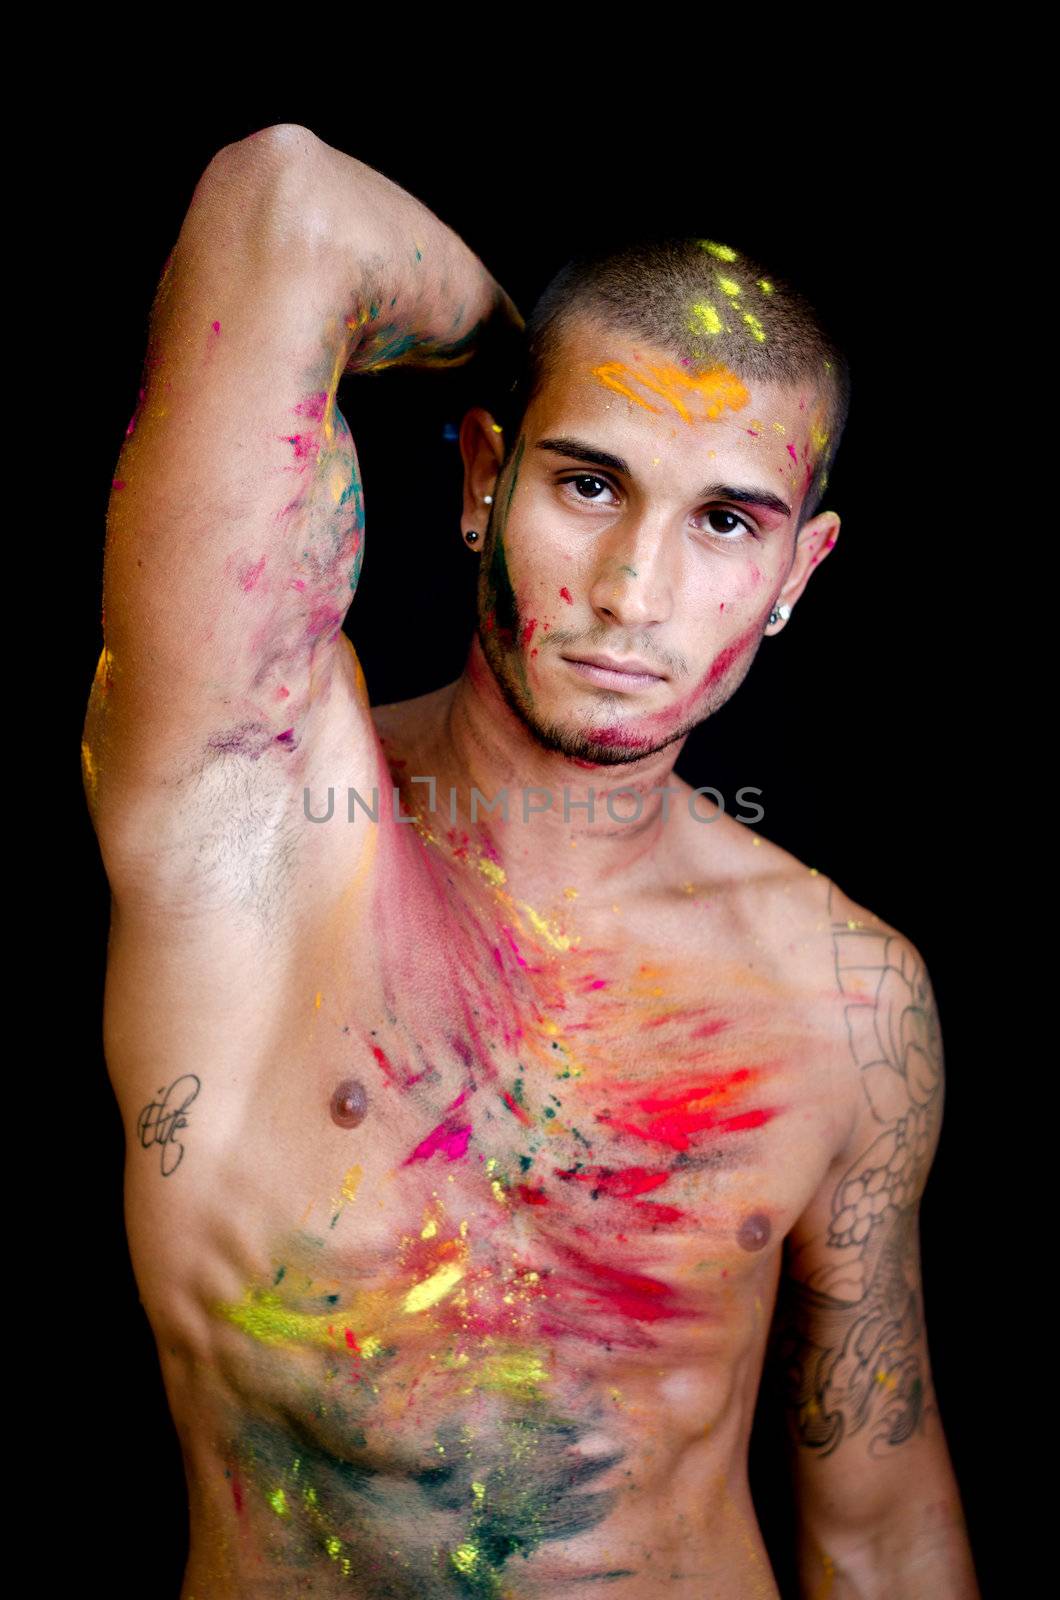 Attractive young man shirtless, skin painted all over with bright colors, arm up and hand behind his head